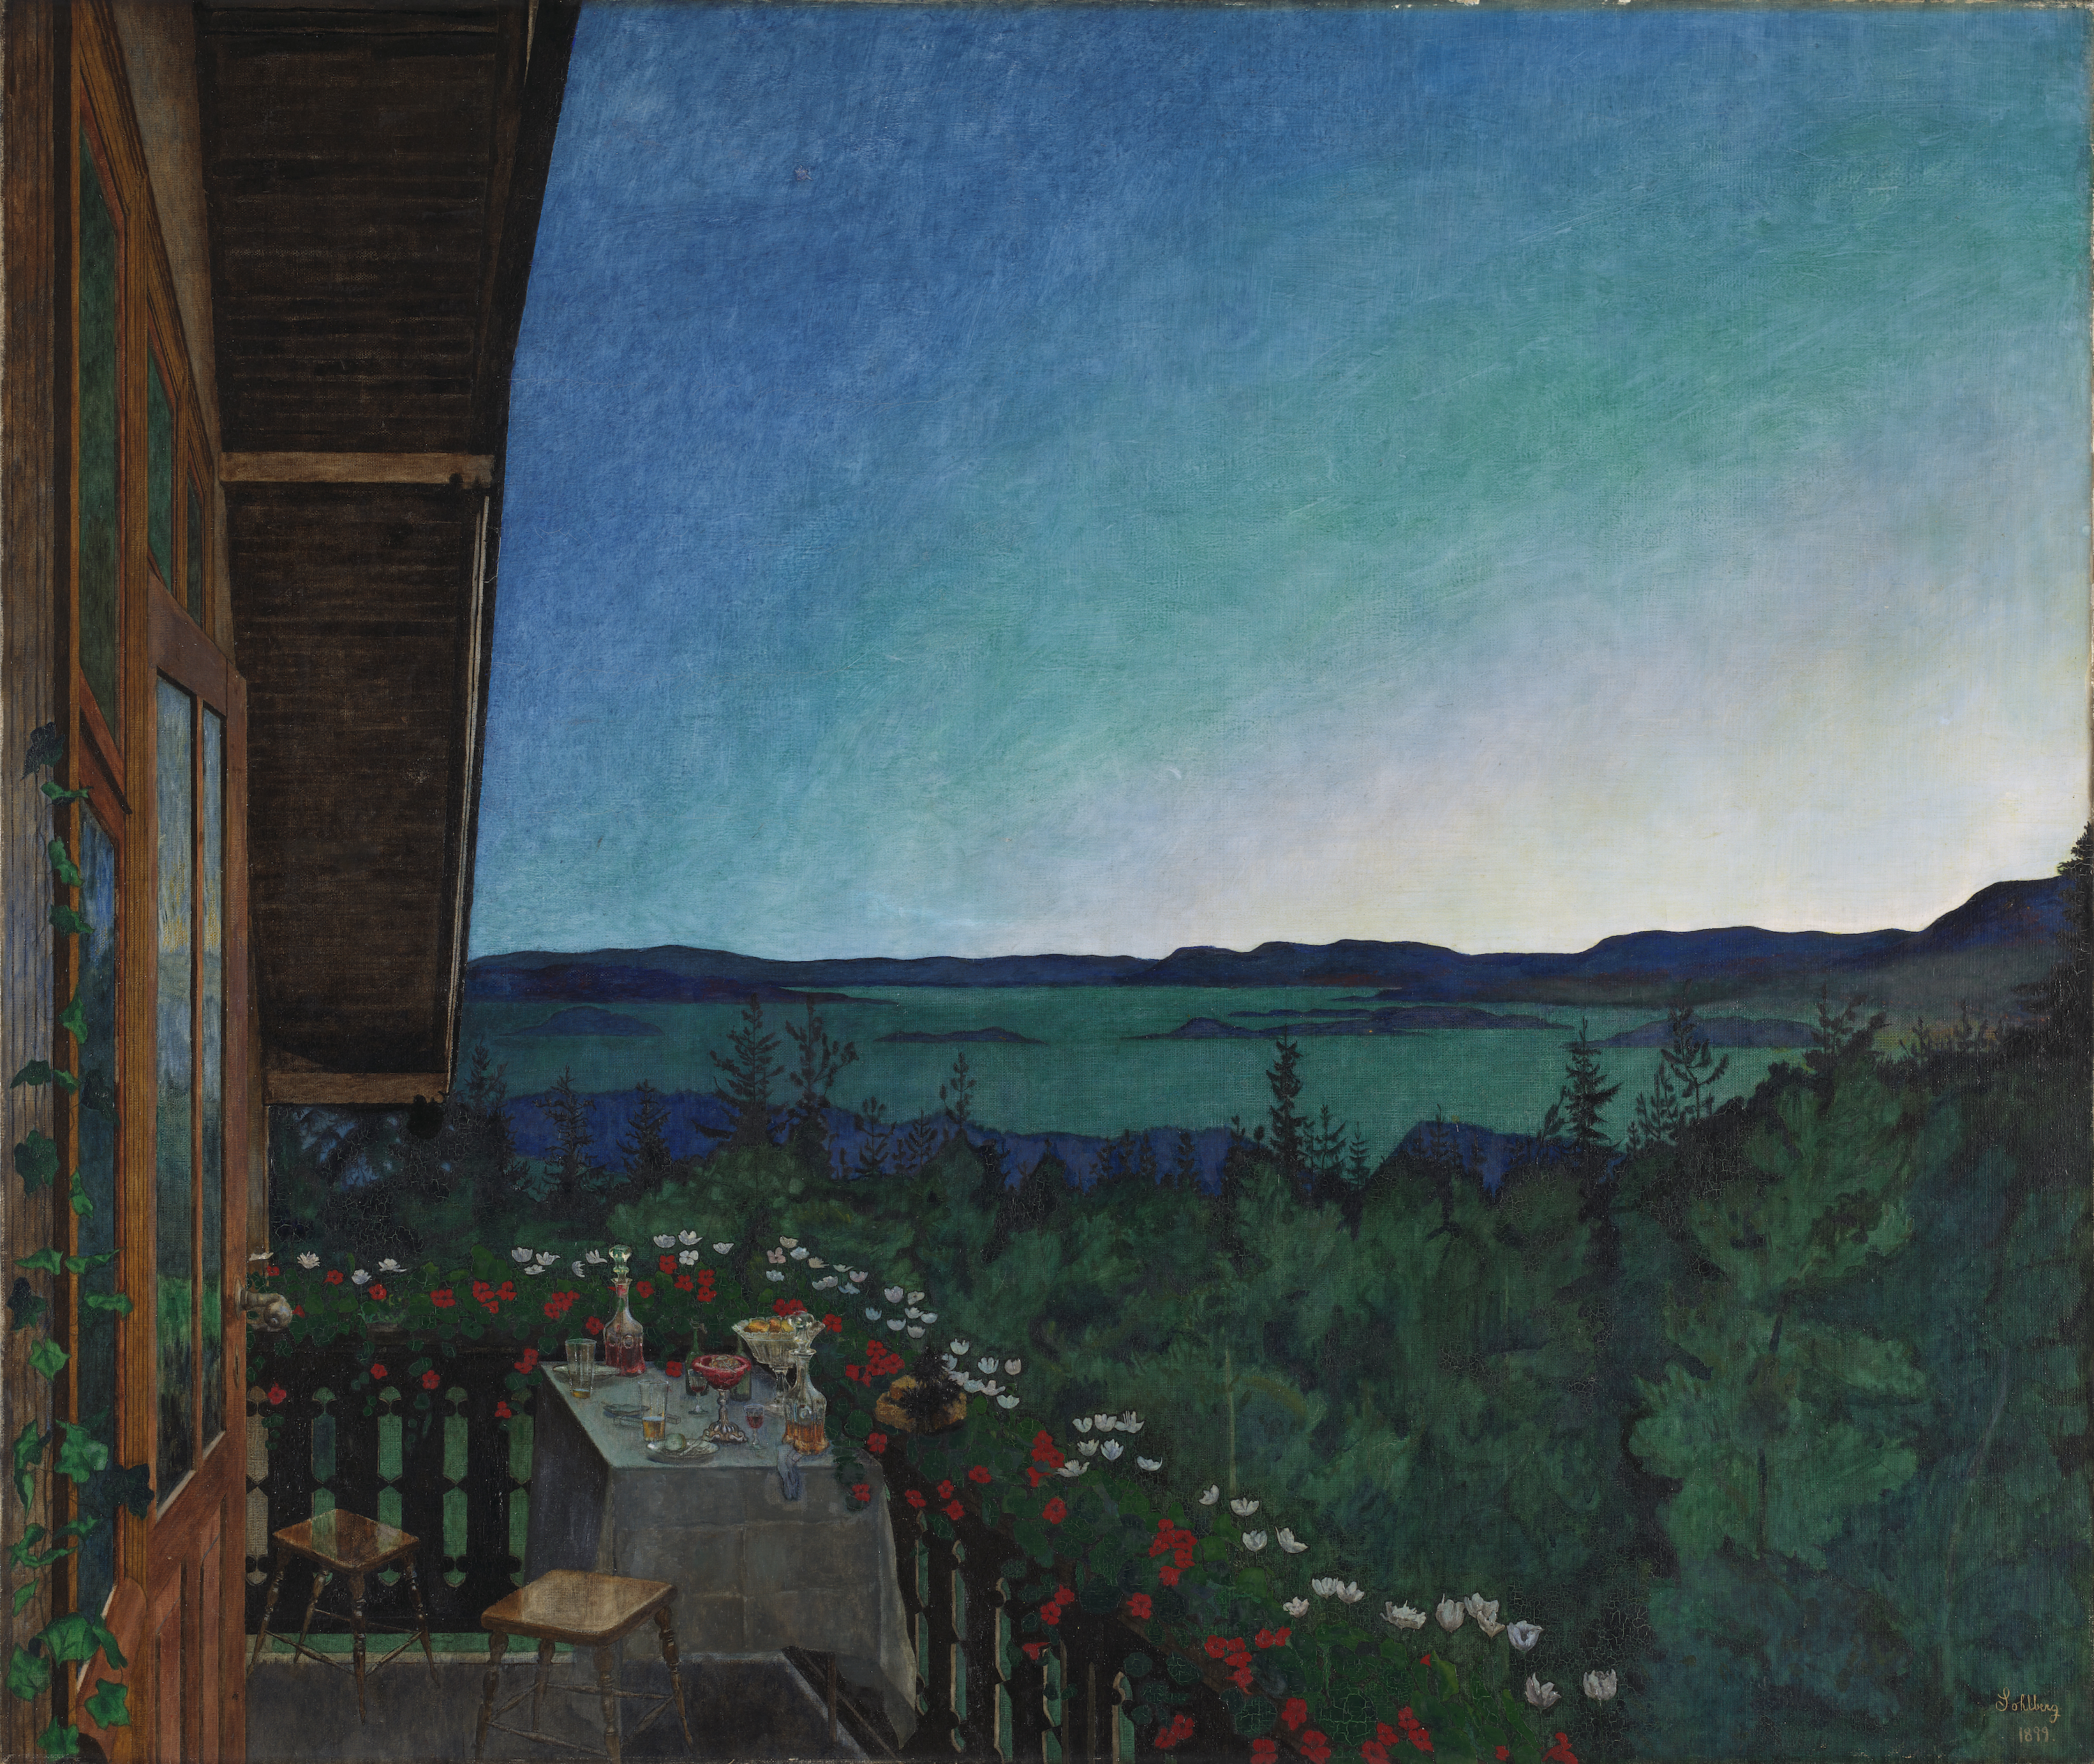 Summer Night by Harald Sohlberg - 1899 - 114,5 x 135,5 cm Dulwich Picture Gallery